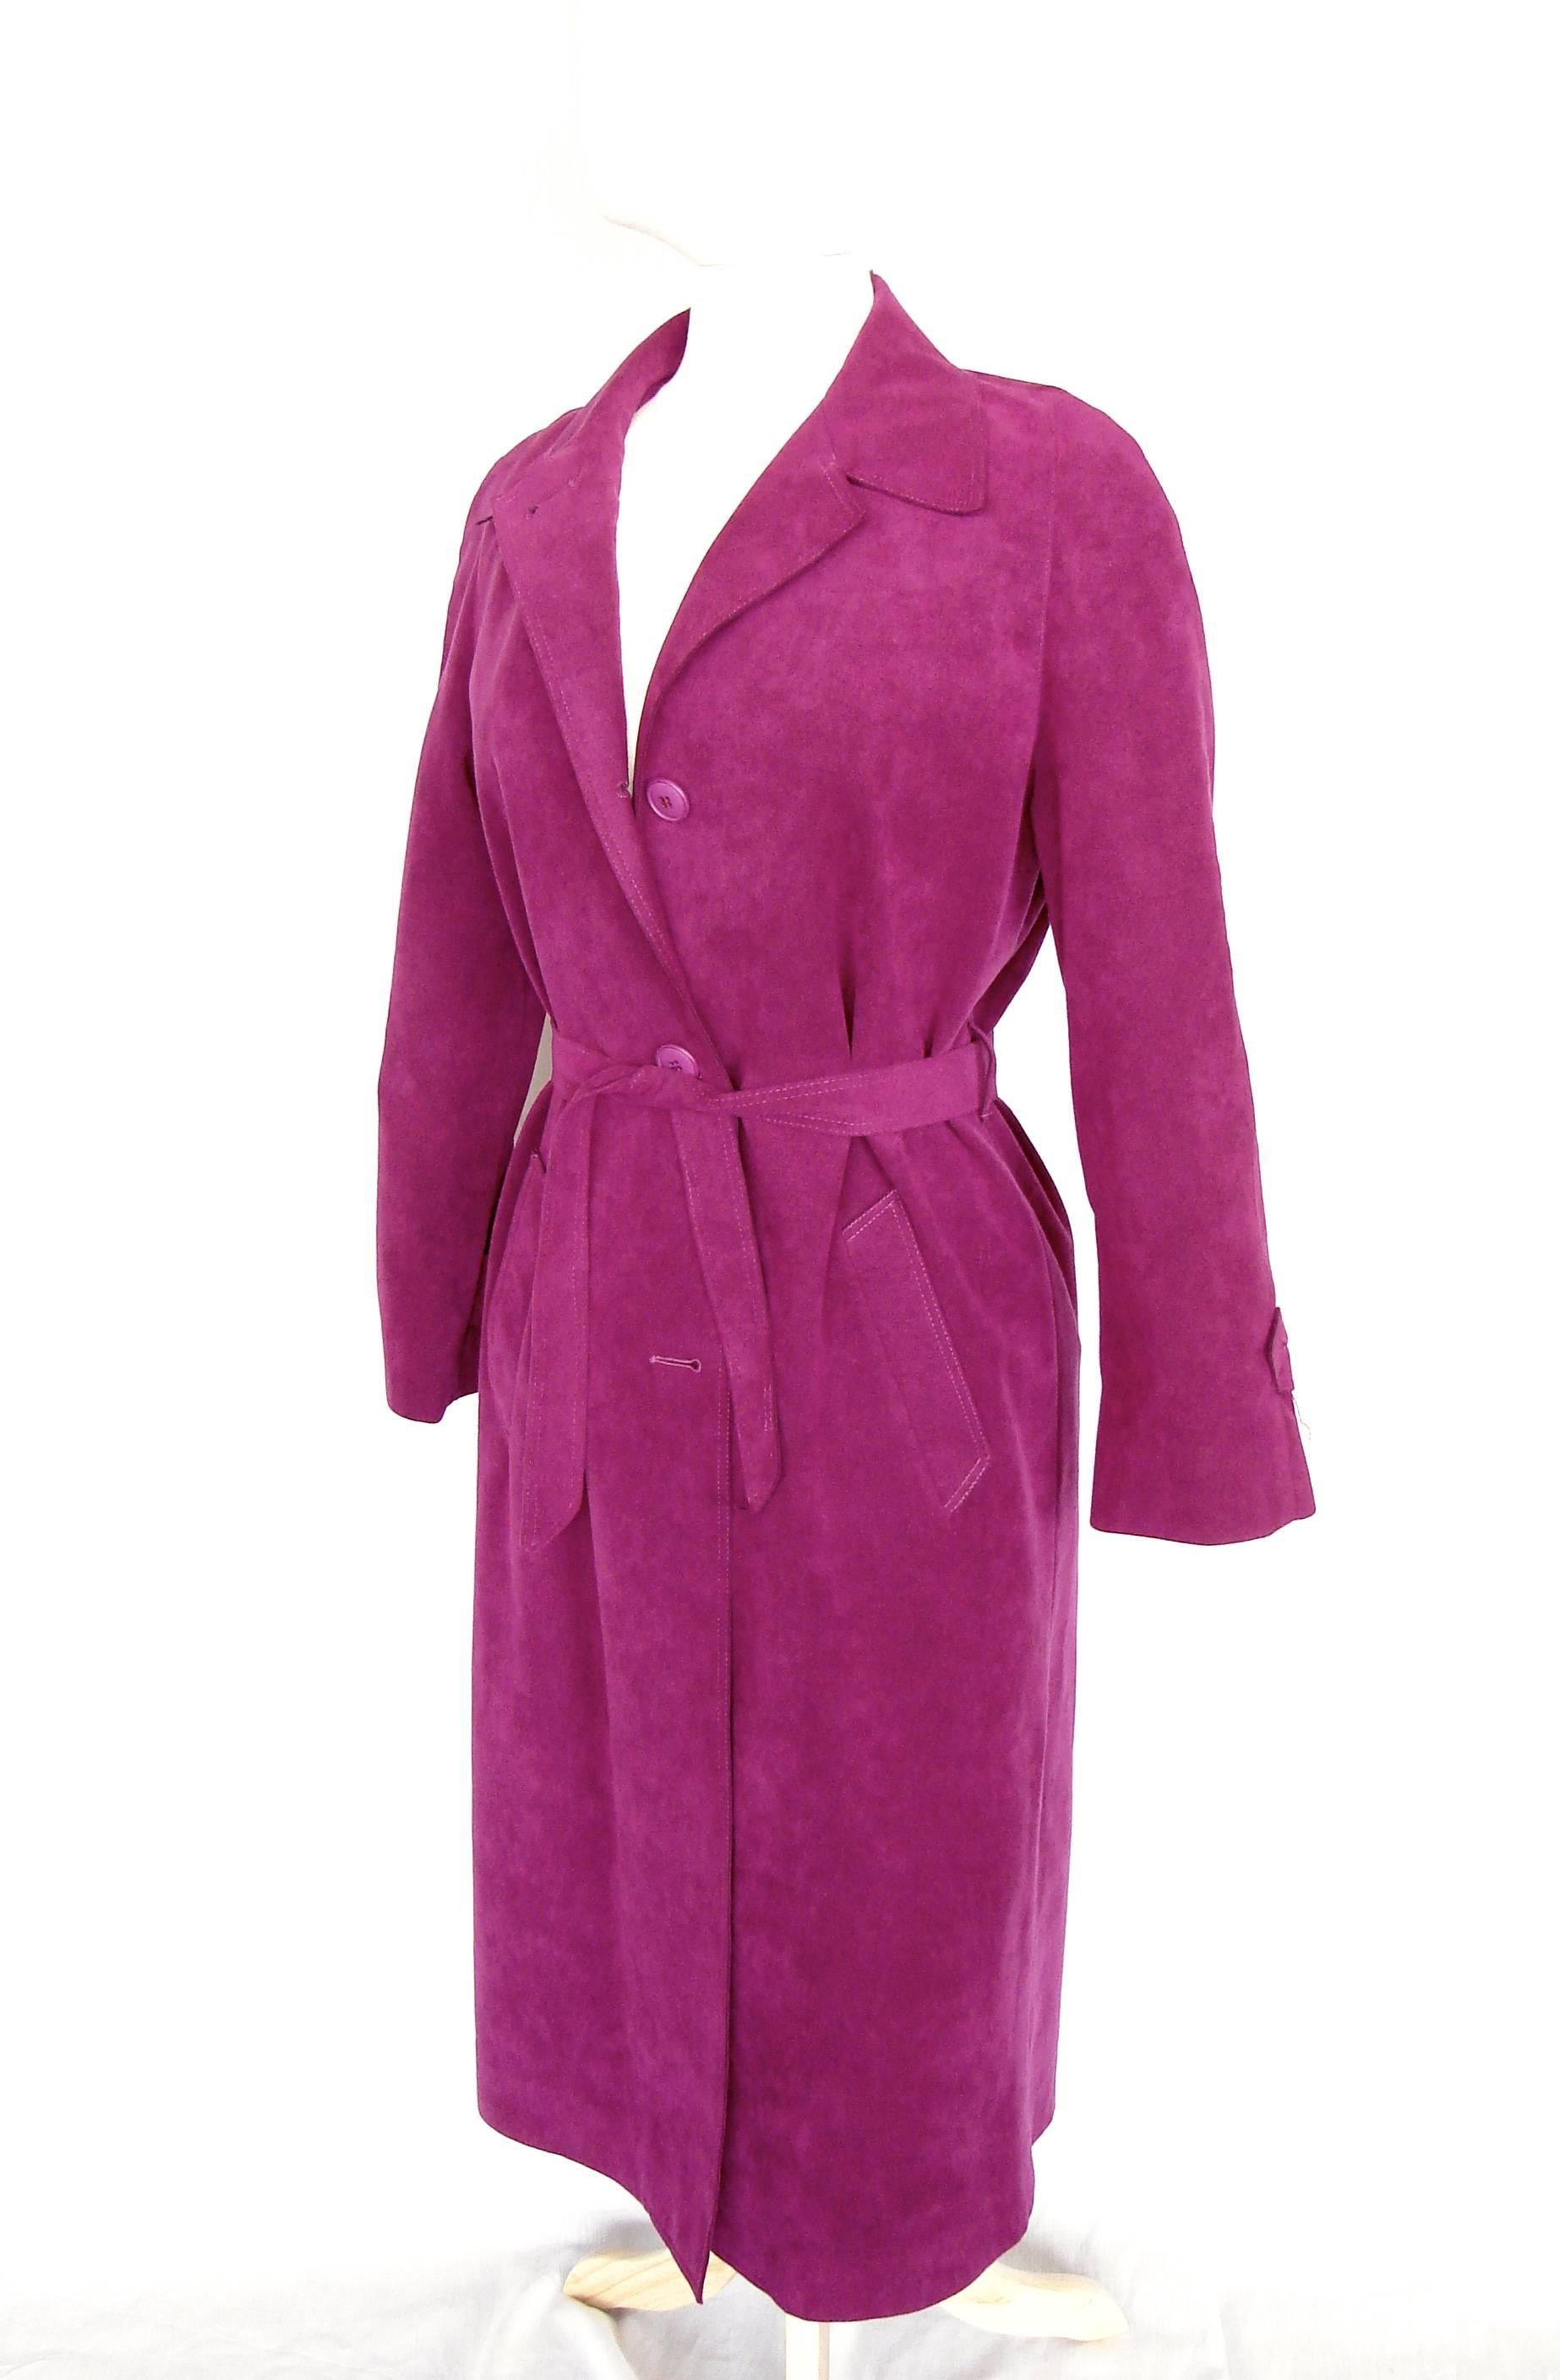 This Lilli Ann coat was made in the late 1970s and is made from an eye-popping magenta Ultrasuede fabric! Fully-lined, it comes with its original belt.  In excellent condition overall, we note four missing buttons: one on the back of each sleeve